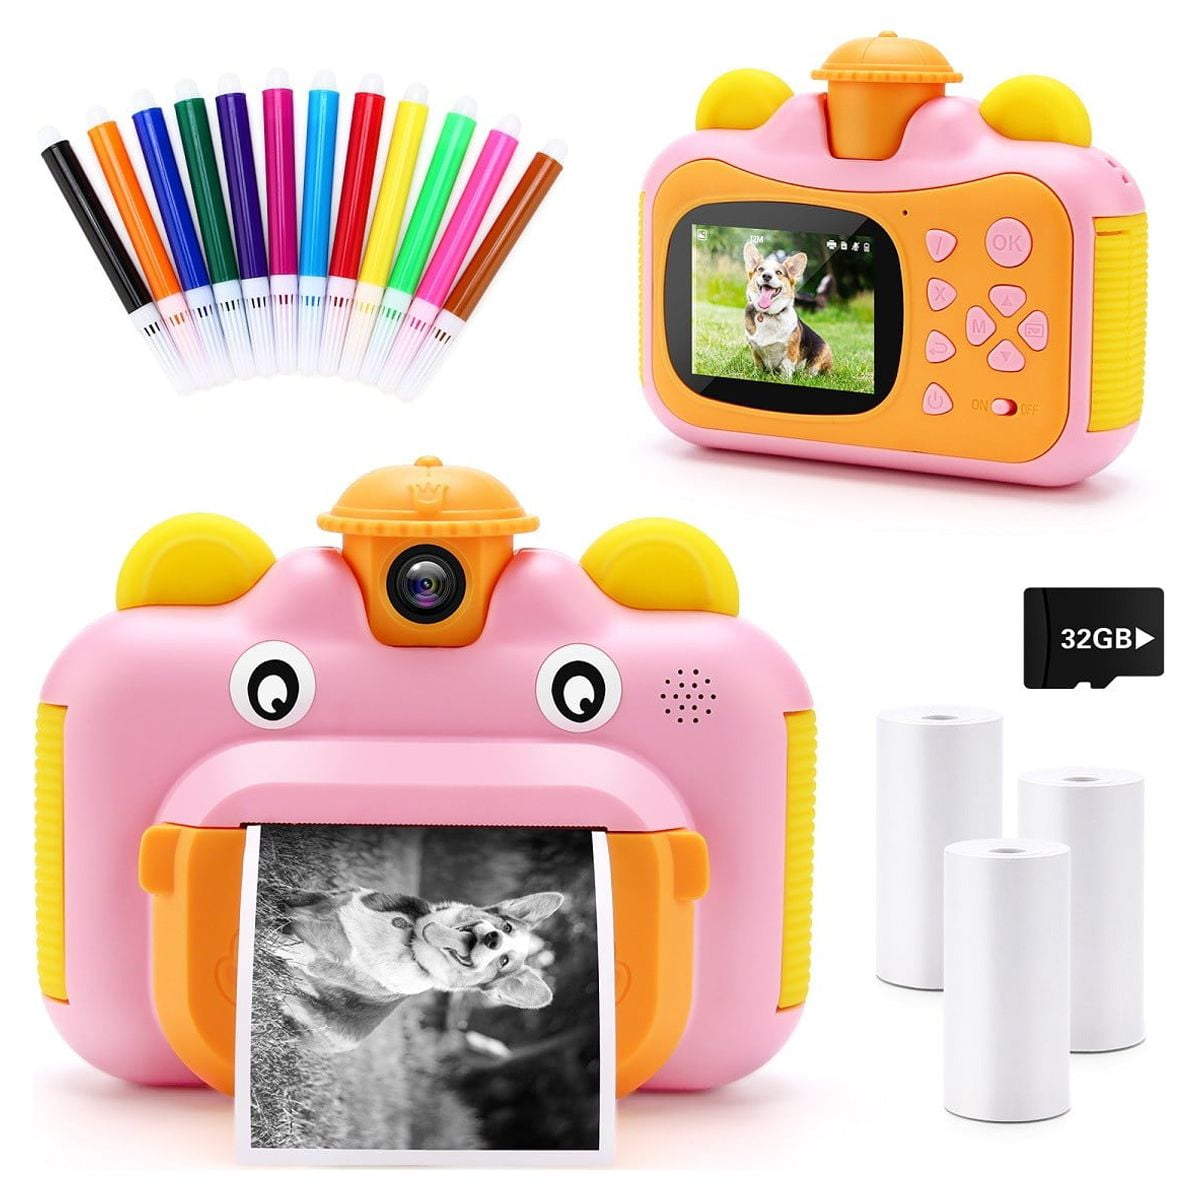 Instant Print Camera for Kids Selfie Video Digital Camera with Paper Film  Girls Boys Children Mini Learning Toy Gifts - AliExpress